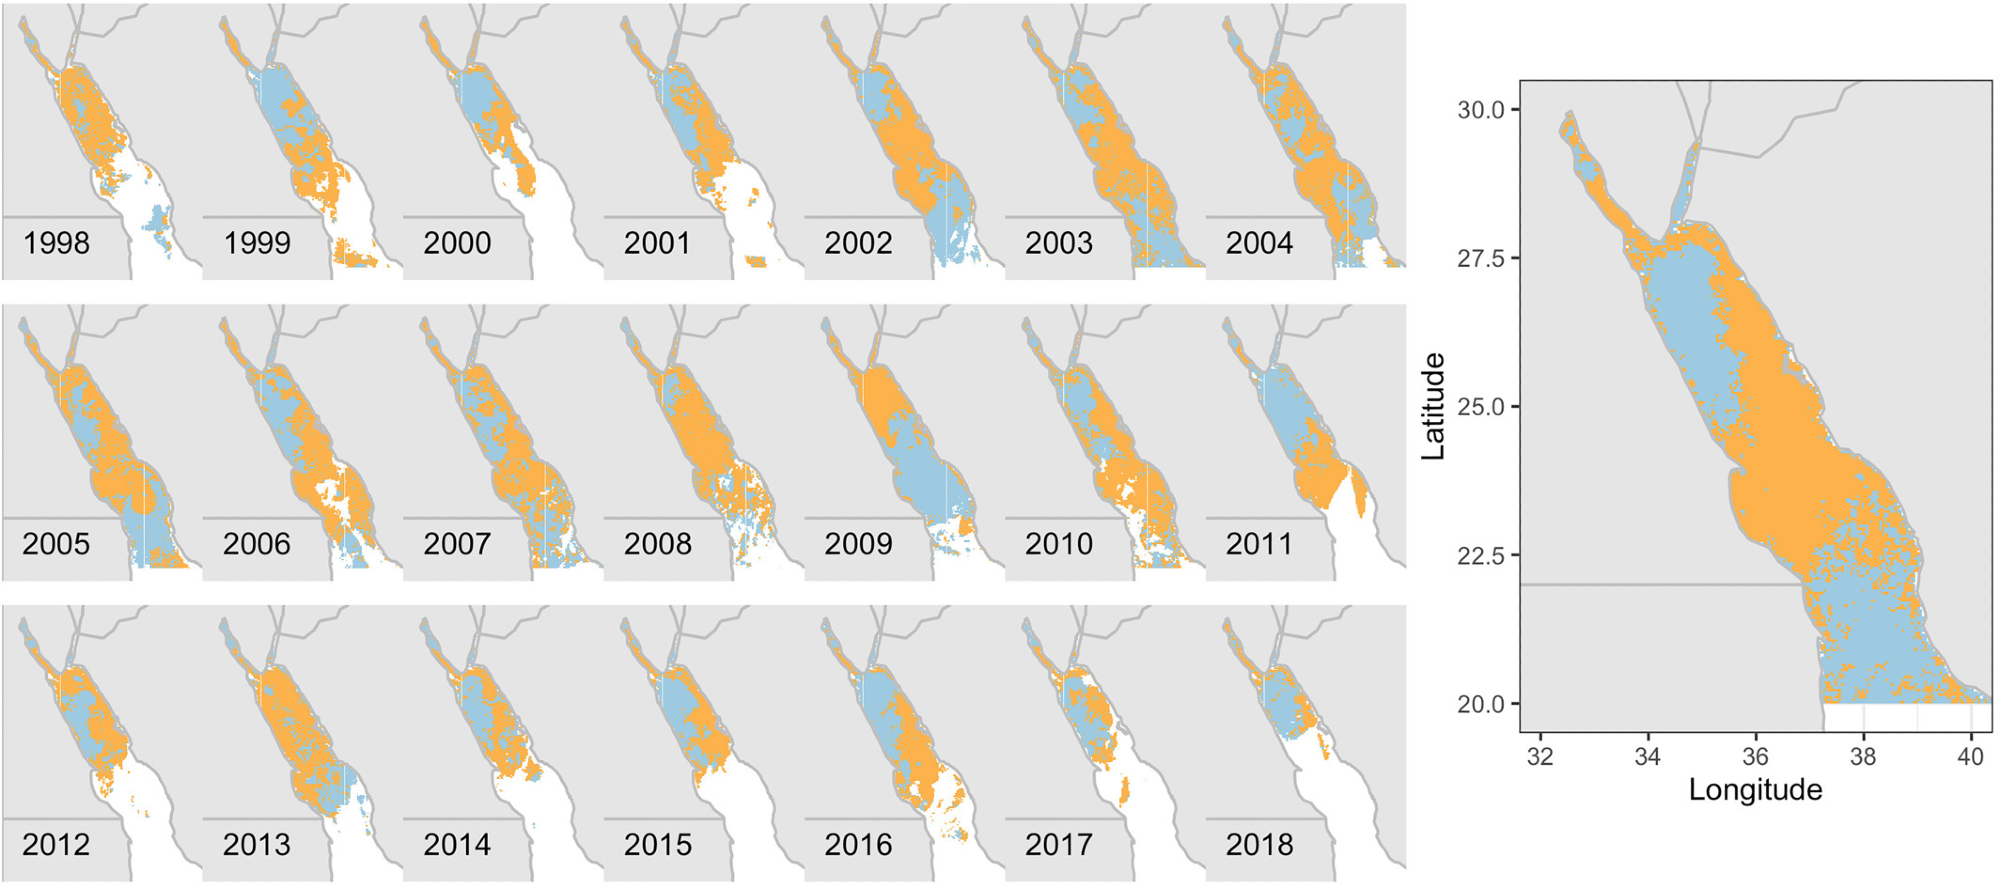 Annual clustering results from the northern part of the Red Sea. (left) Annual spatial distribution of bio-regions #3 and #4 from 1998 to 2018, and (right) the average map.